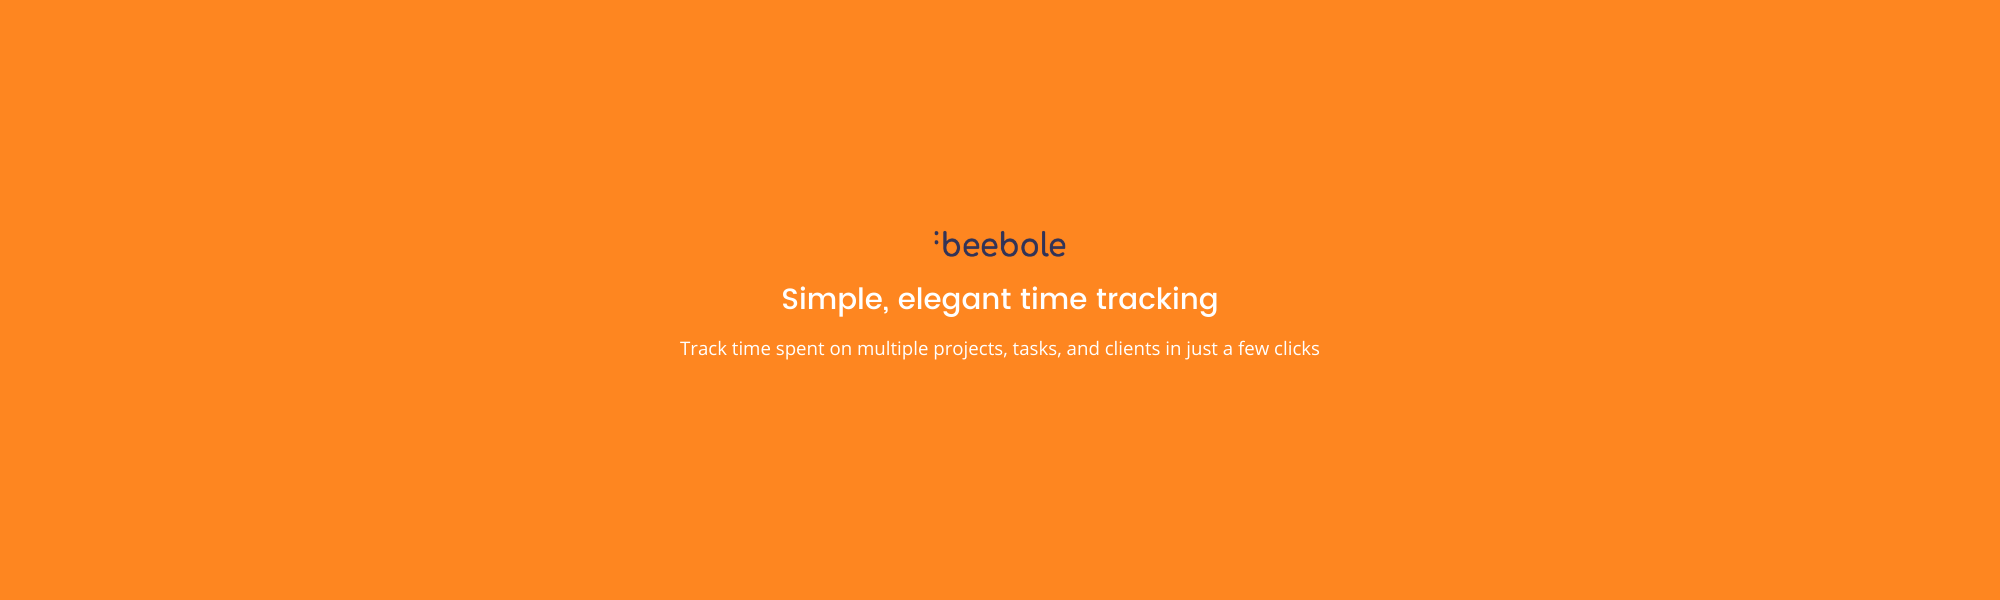 Review Beebole: Fast, easy & flexible time tracking for all companies - Appvizer